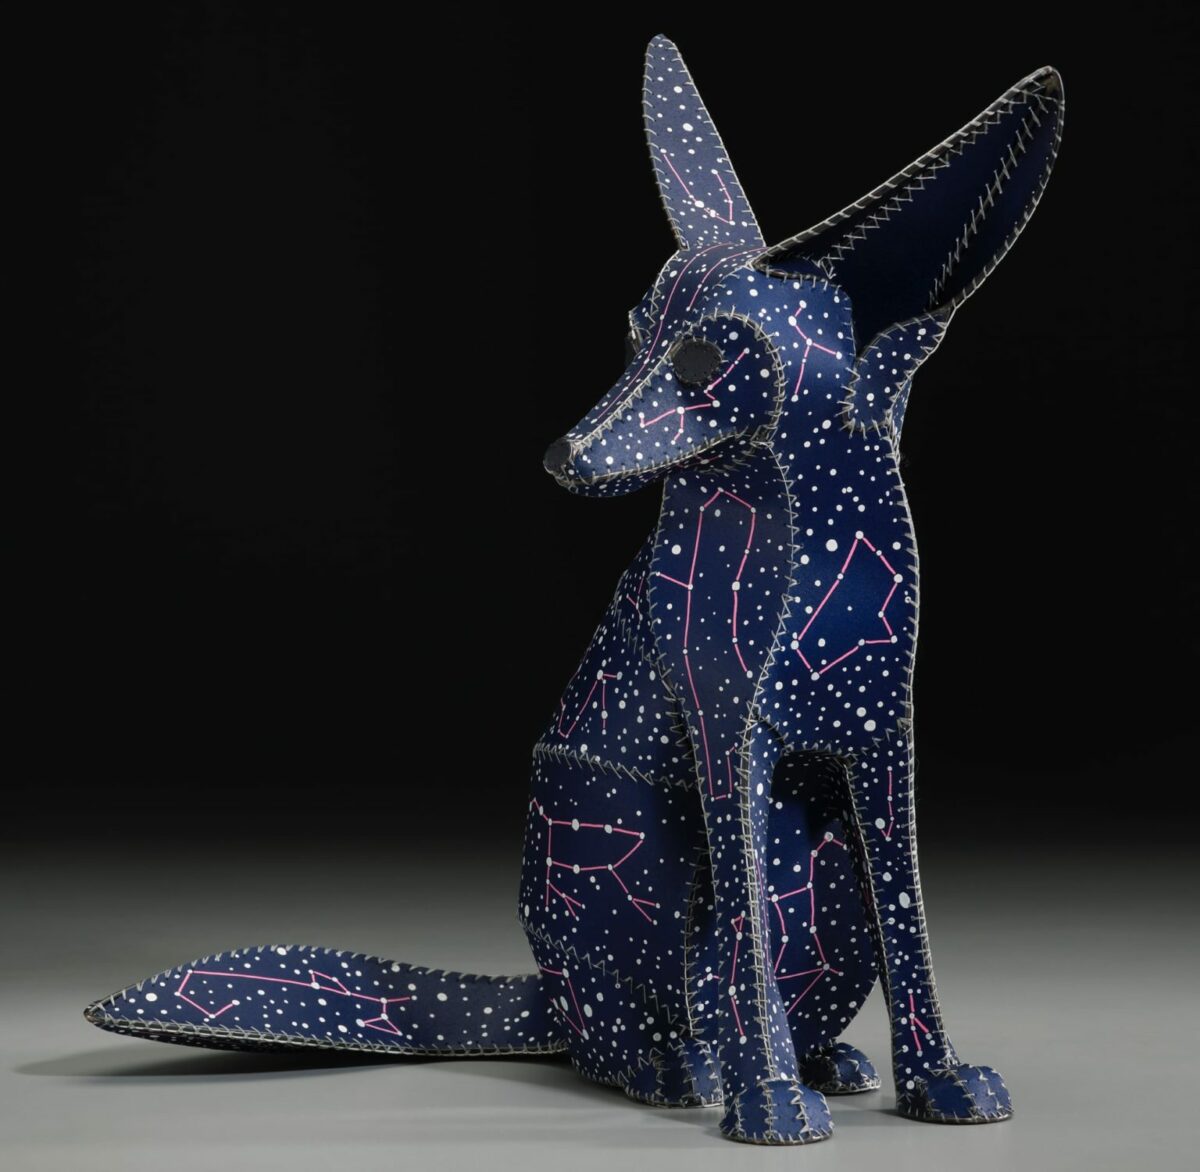 Stunning Three Dimensional Animal Paper Sculptures Decorated With Colorful Patterns By Anne Lemanski (8)